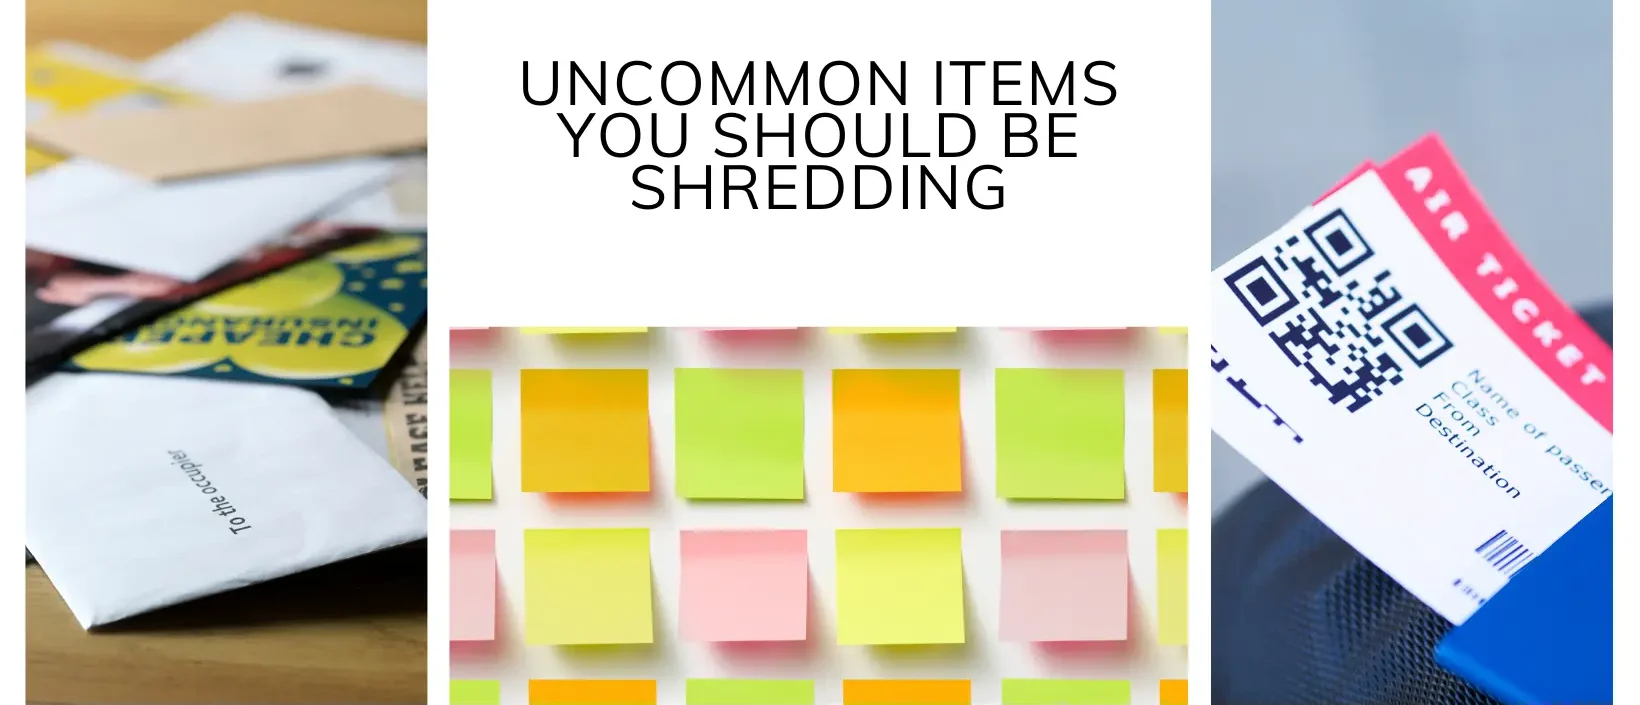 Uncommon Items You Should Be Shredding